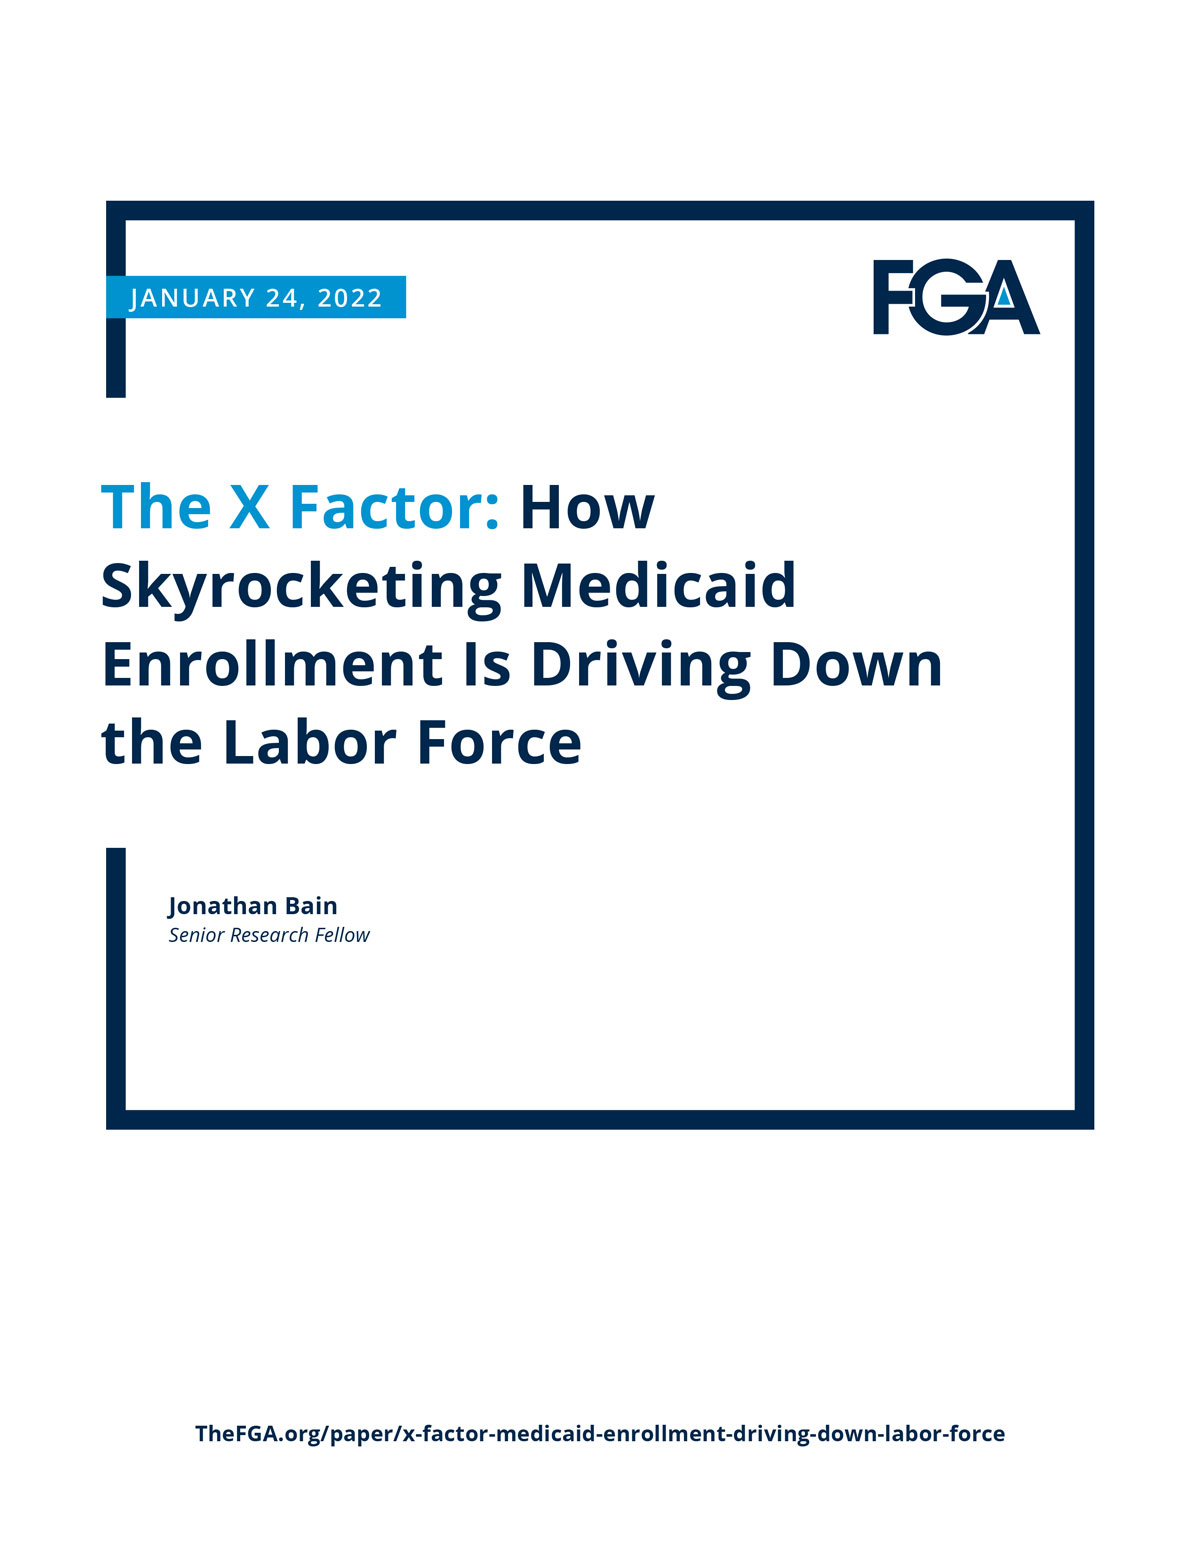 The X factor: How Skyrocketing Medicaid Enrollment is Driving Down the Labor Force